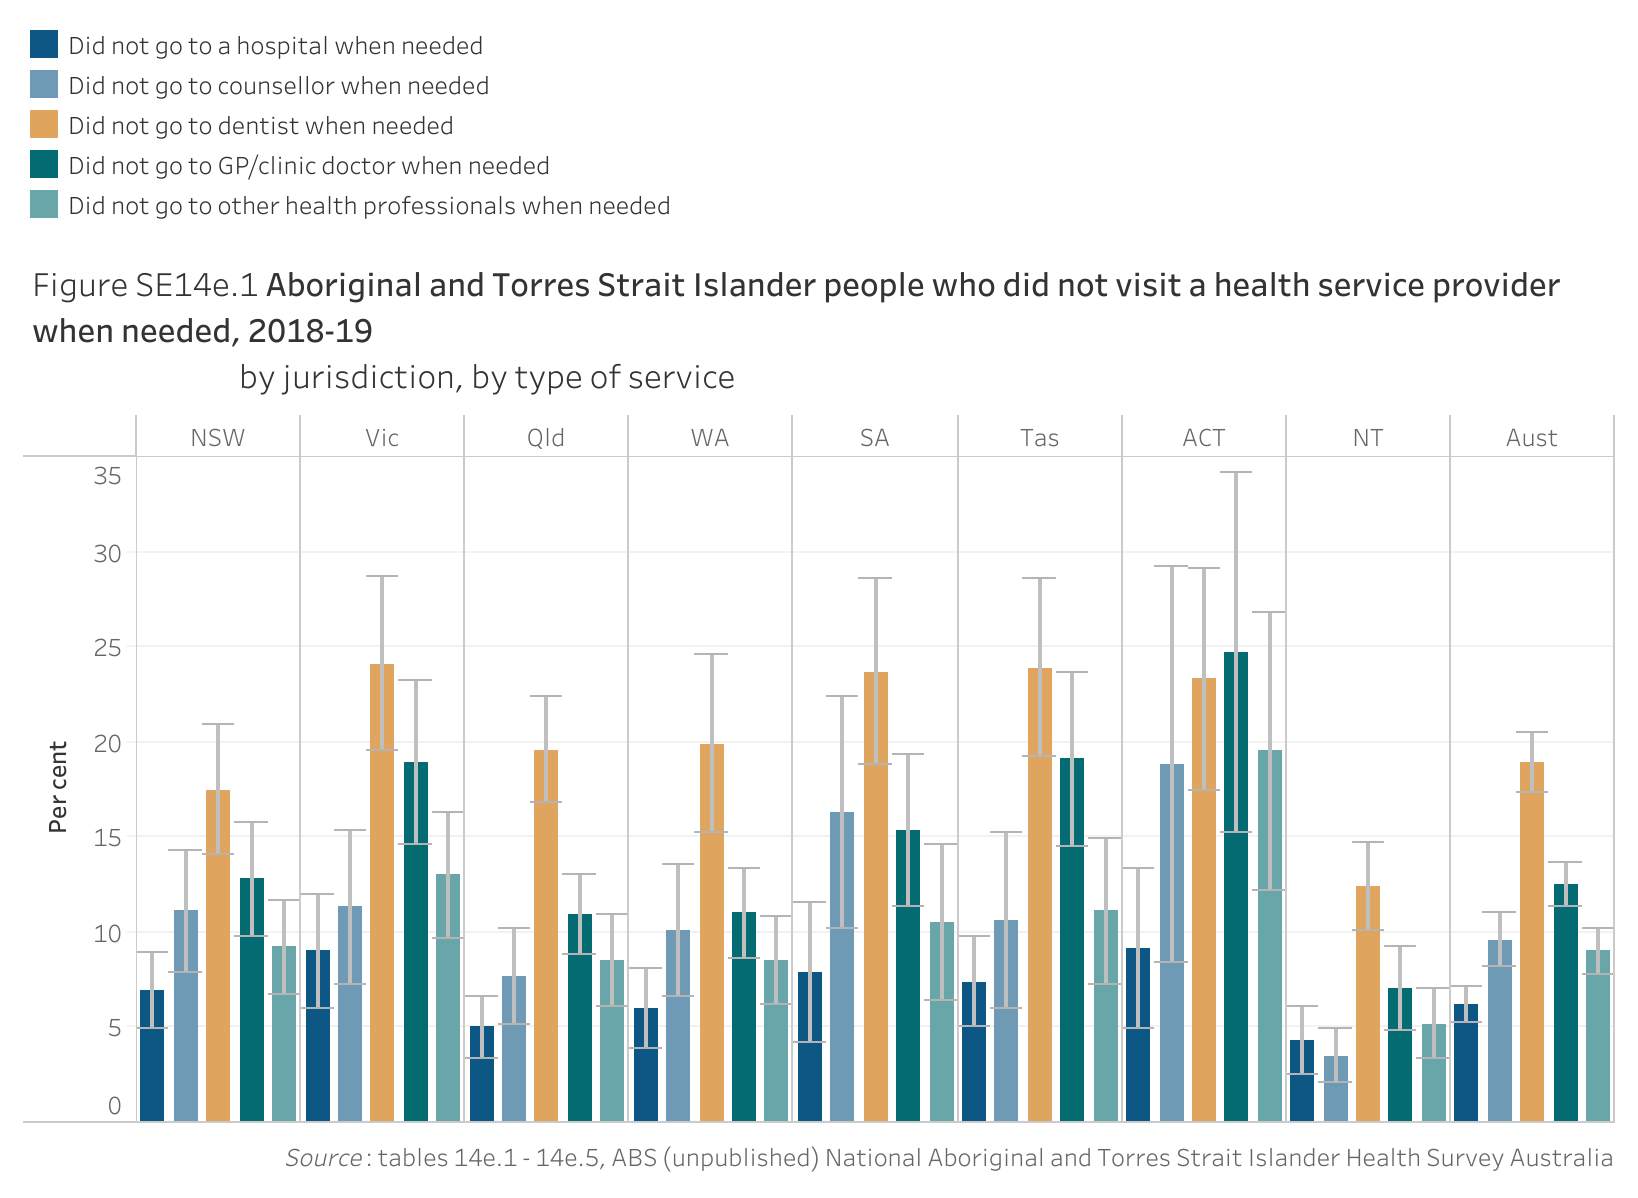 Figure SE14e.1 shows Aboriginal and Torres Strait Islander people who did not visit a health service provider when needed, 2018-19, by jurisdiction, by type of service. More details can be found within the text near this image.